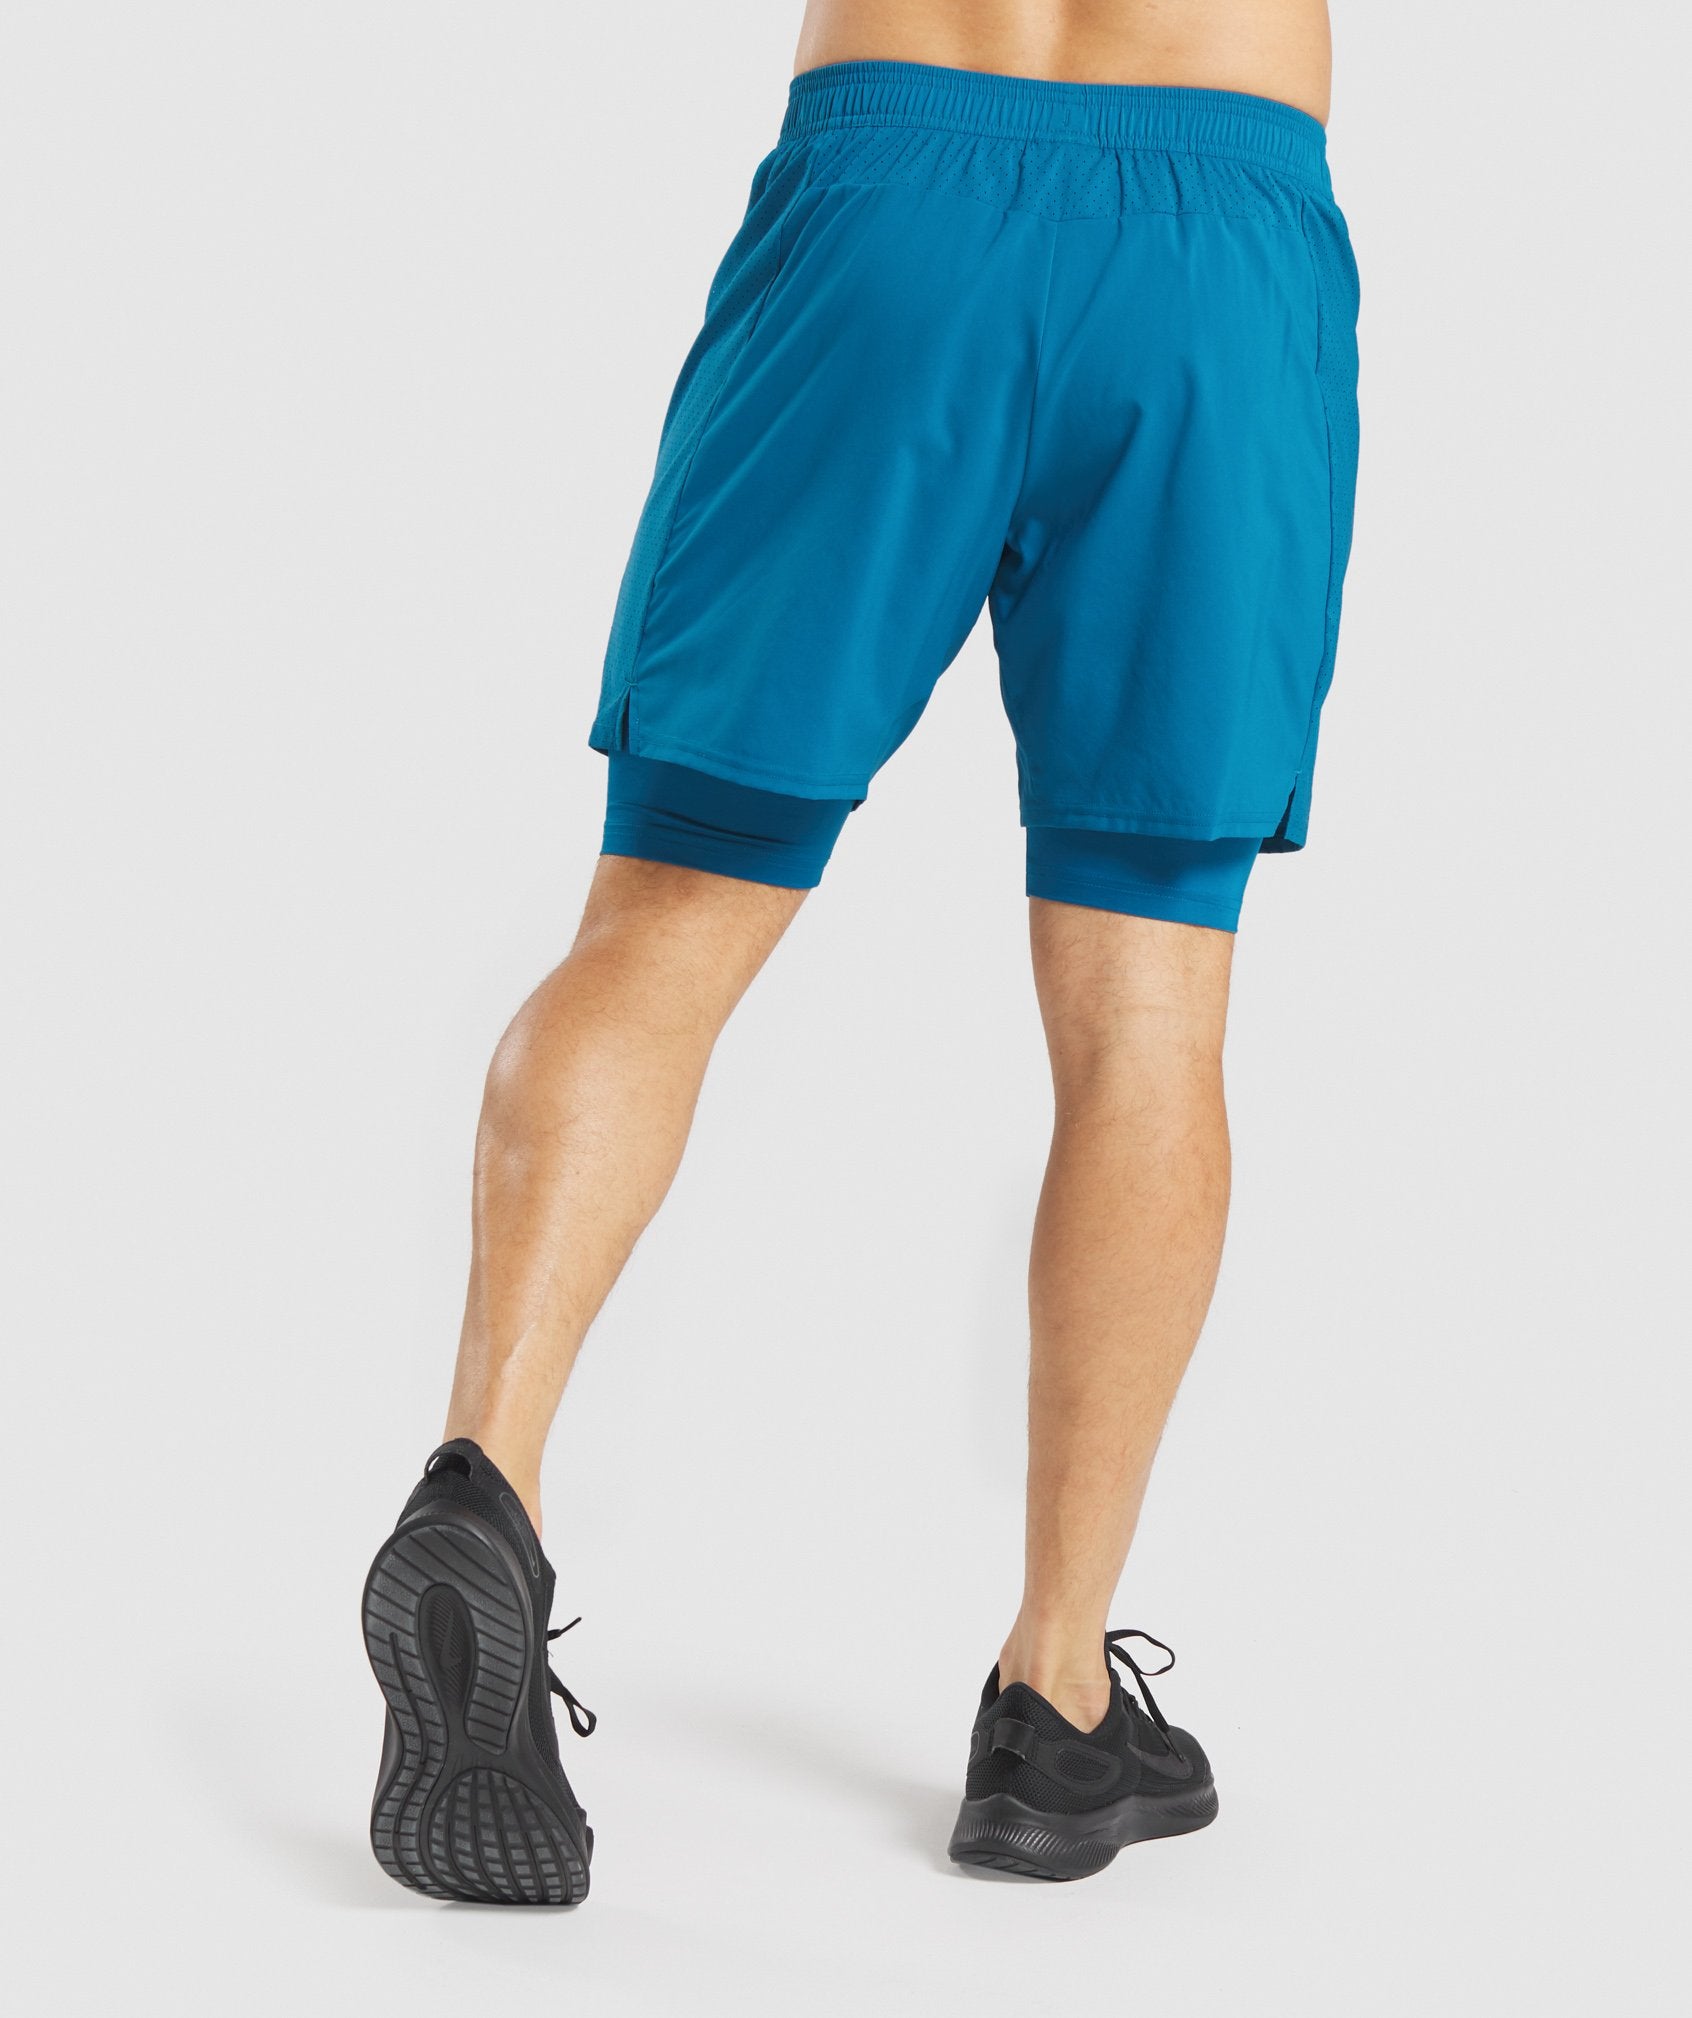 Aspect 2 in 1 Shorts in Teal